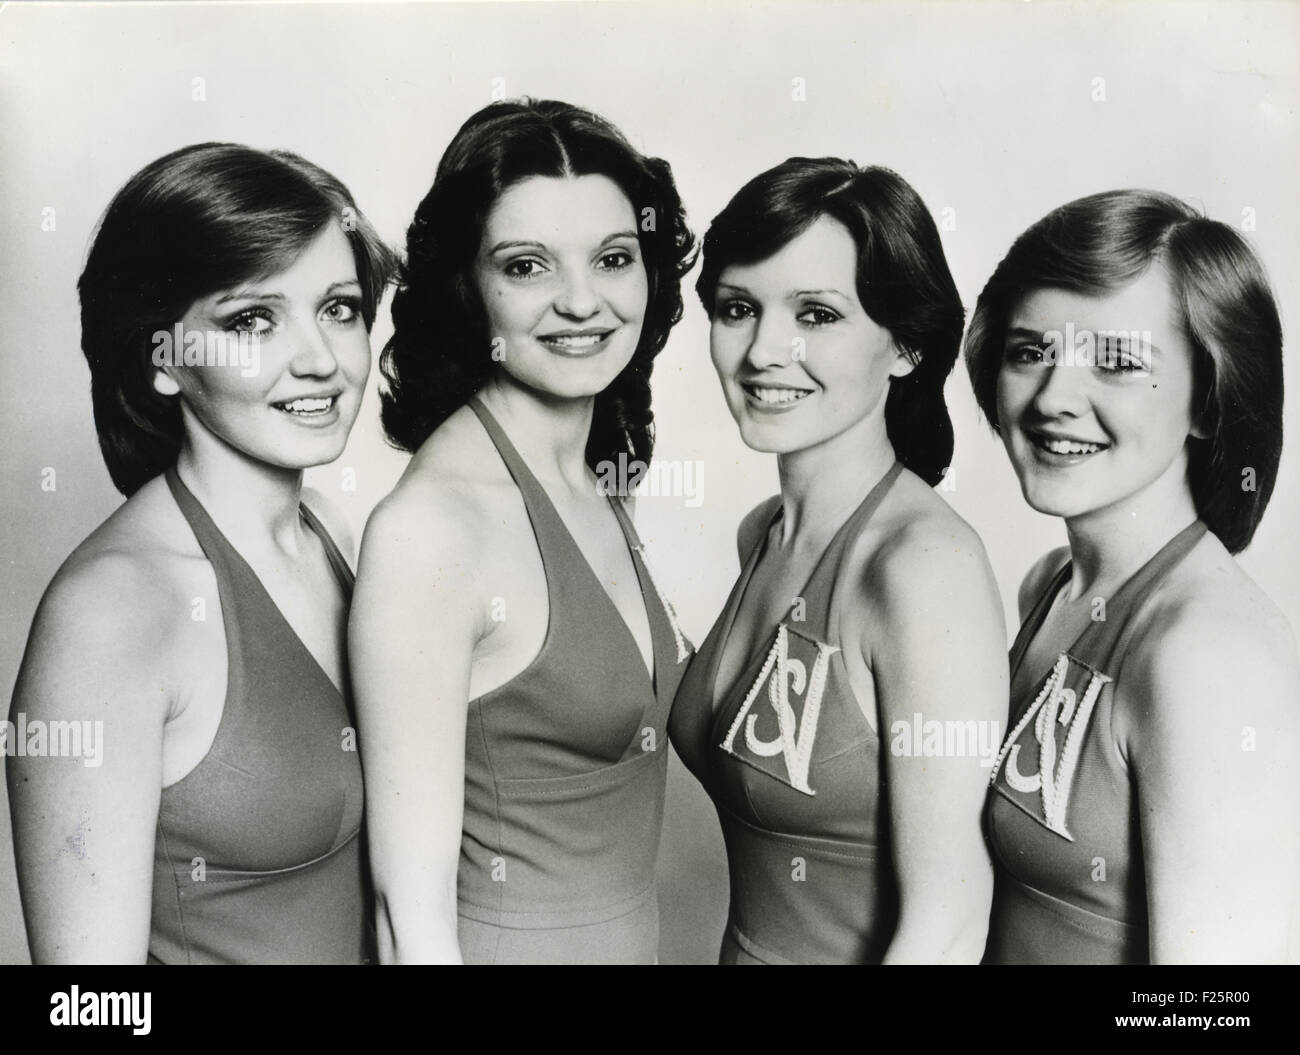 THE NOLANS Promotional photo of Irish-English girl group about 1980 with Bernie Coleen at right Stock Photo